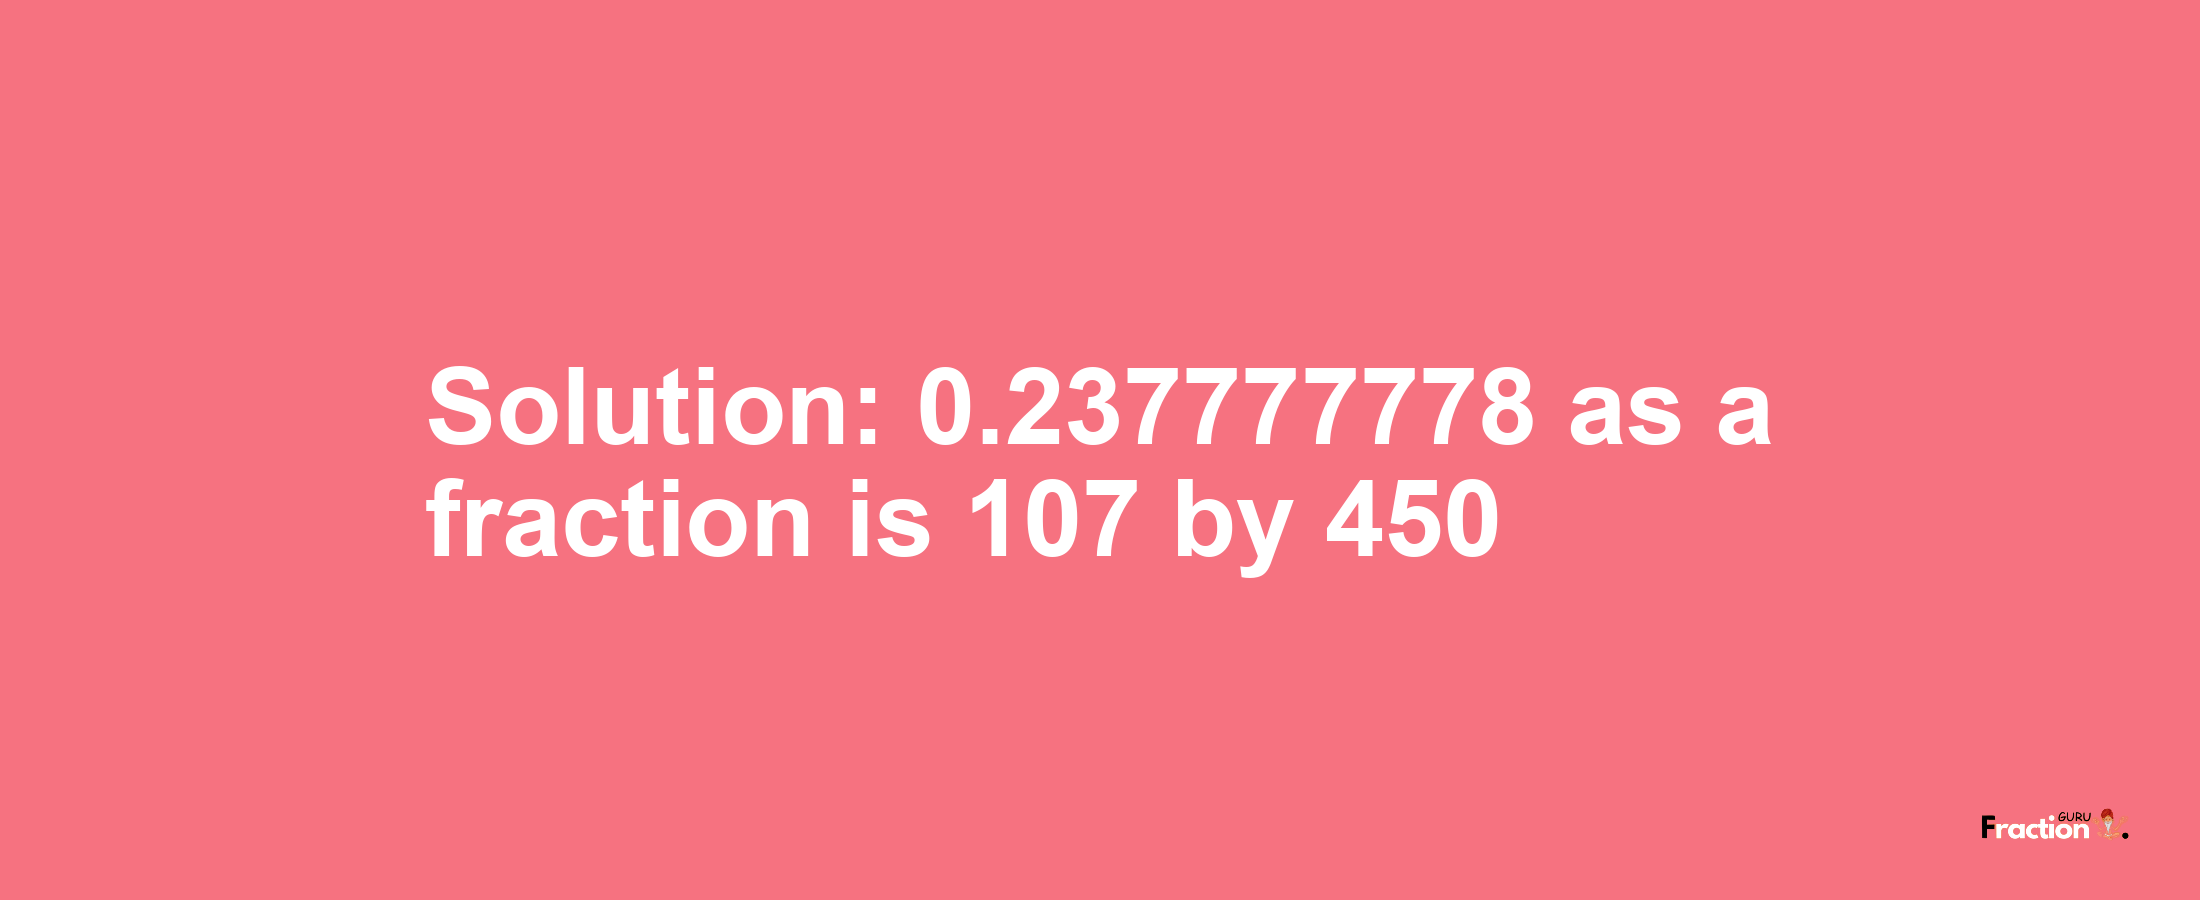 Solution:0.237777778 as a fraction is 107/450